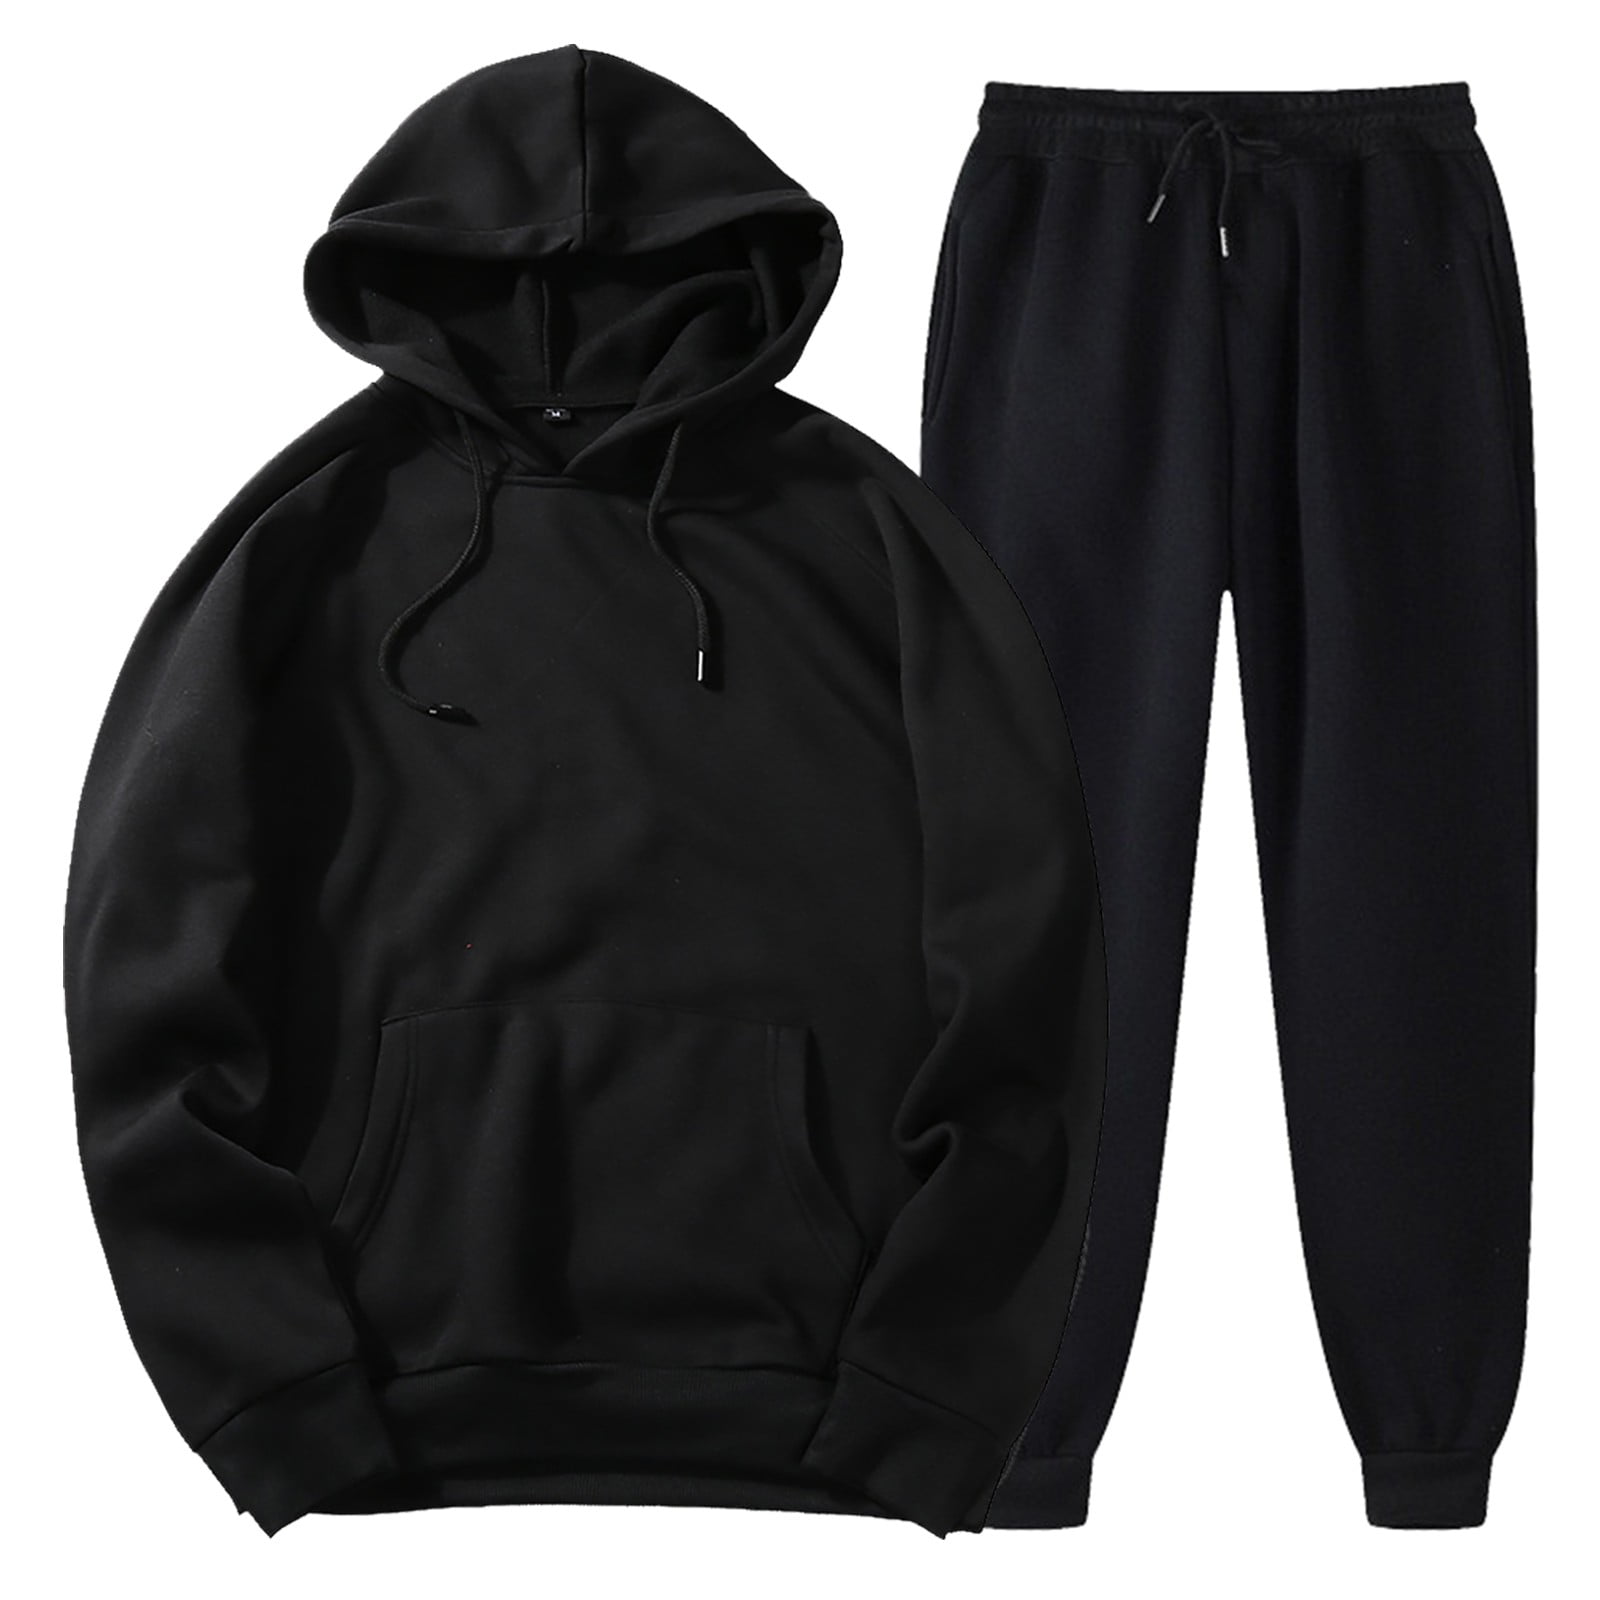 Loose Simple Suits Men Solid Color Long Sleeve Tops And Trousers Hoodie Plus Leisure Winter Fleece Hooded Sweatershirt Vacation Beach Party Sets - Walmart.com